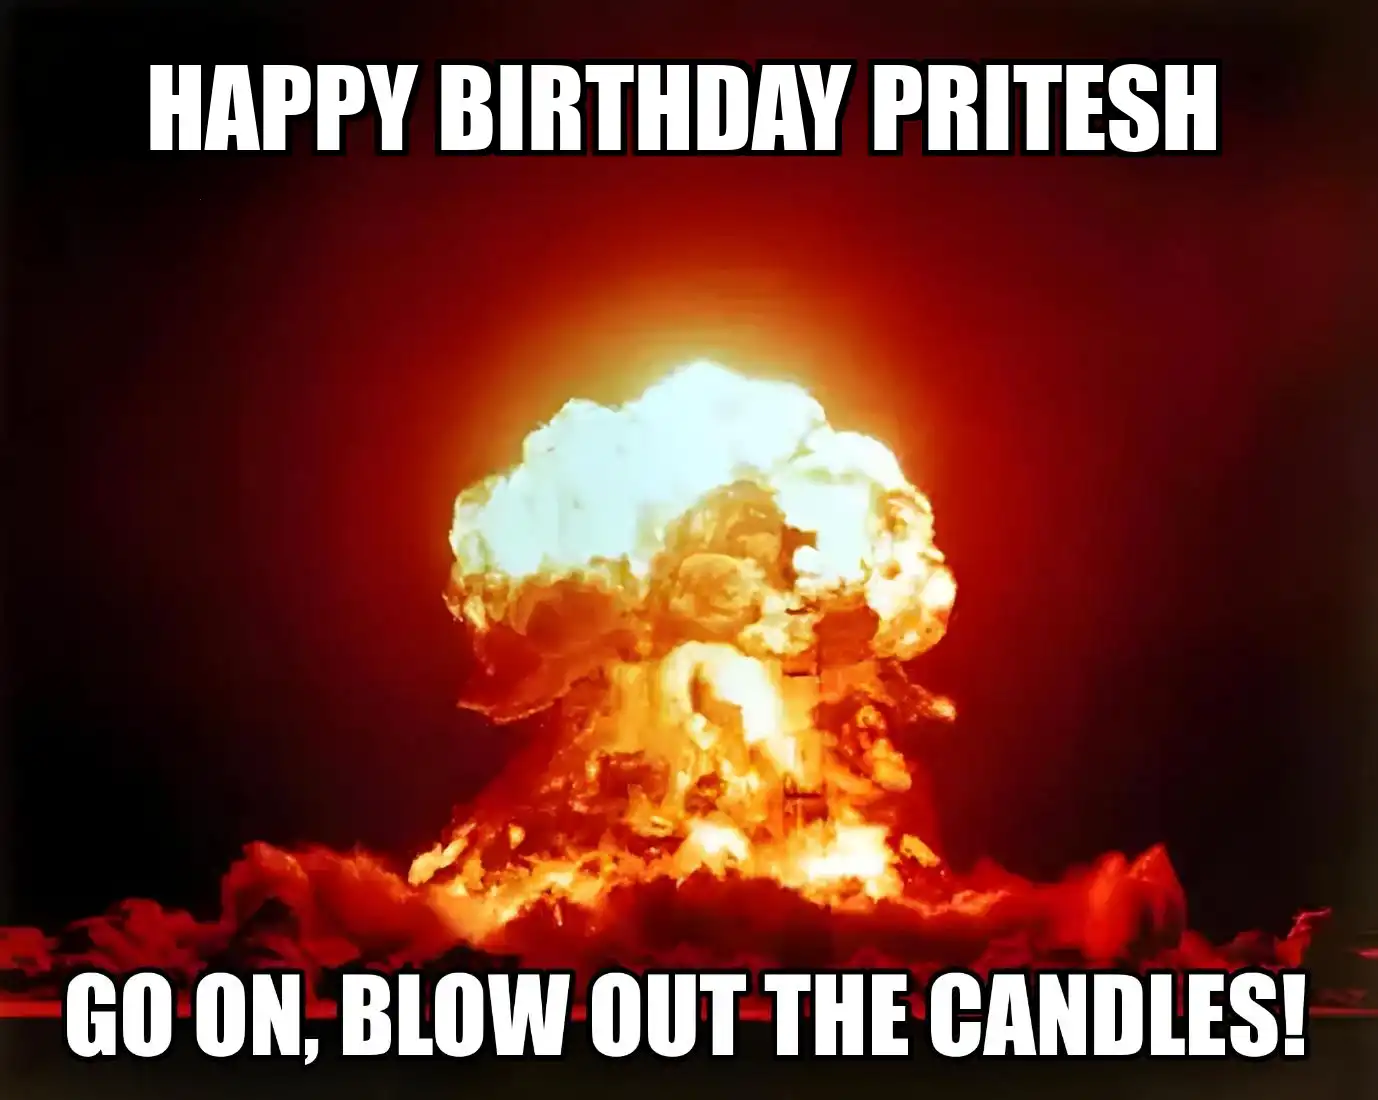 Happy Birthday Pritesh Go On Blow Out The Candles Meme